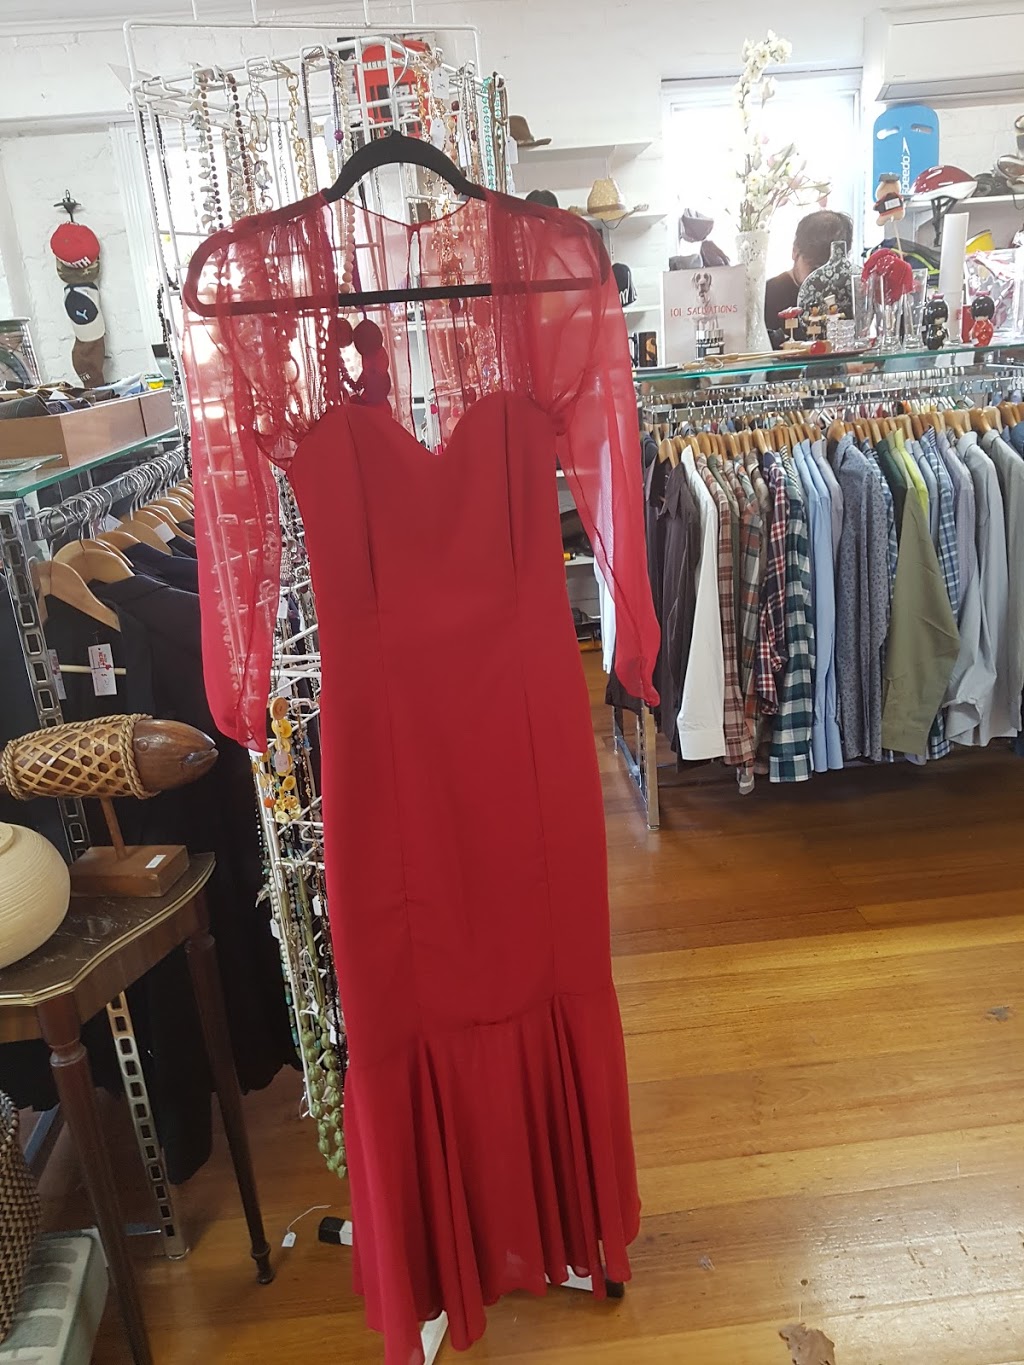 Sacred Heart Mission Op Shop | store | 806 Nicholson St, Fitzroy North VIC 3068, Australia | 0394893713 OR +61 3 9489 3713